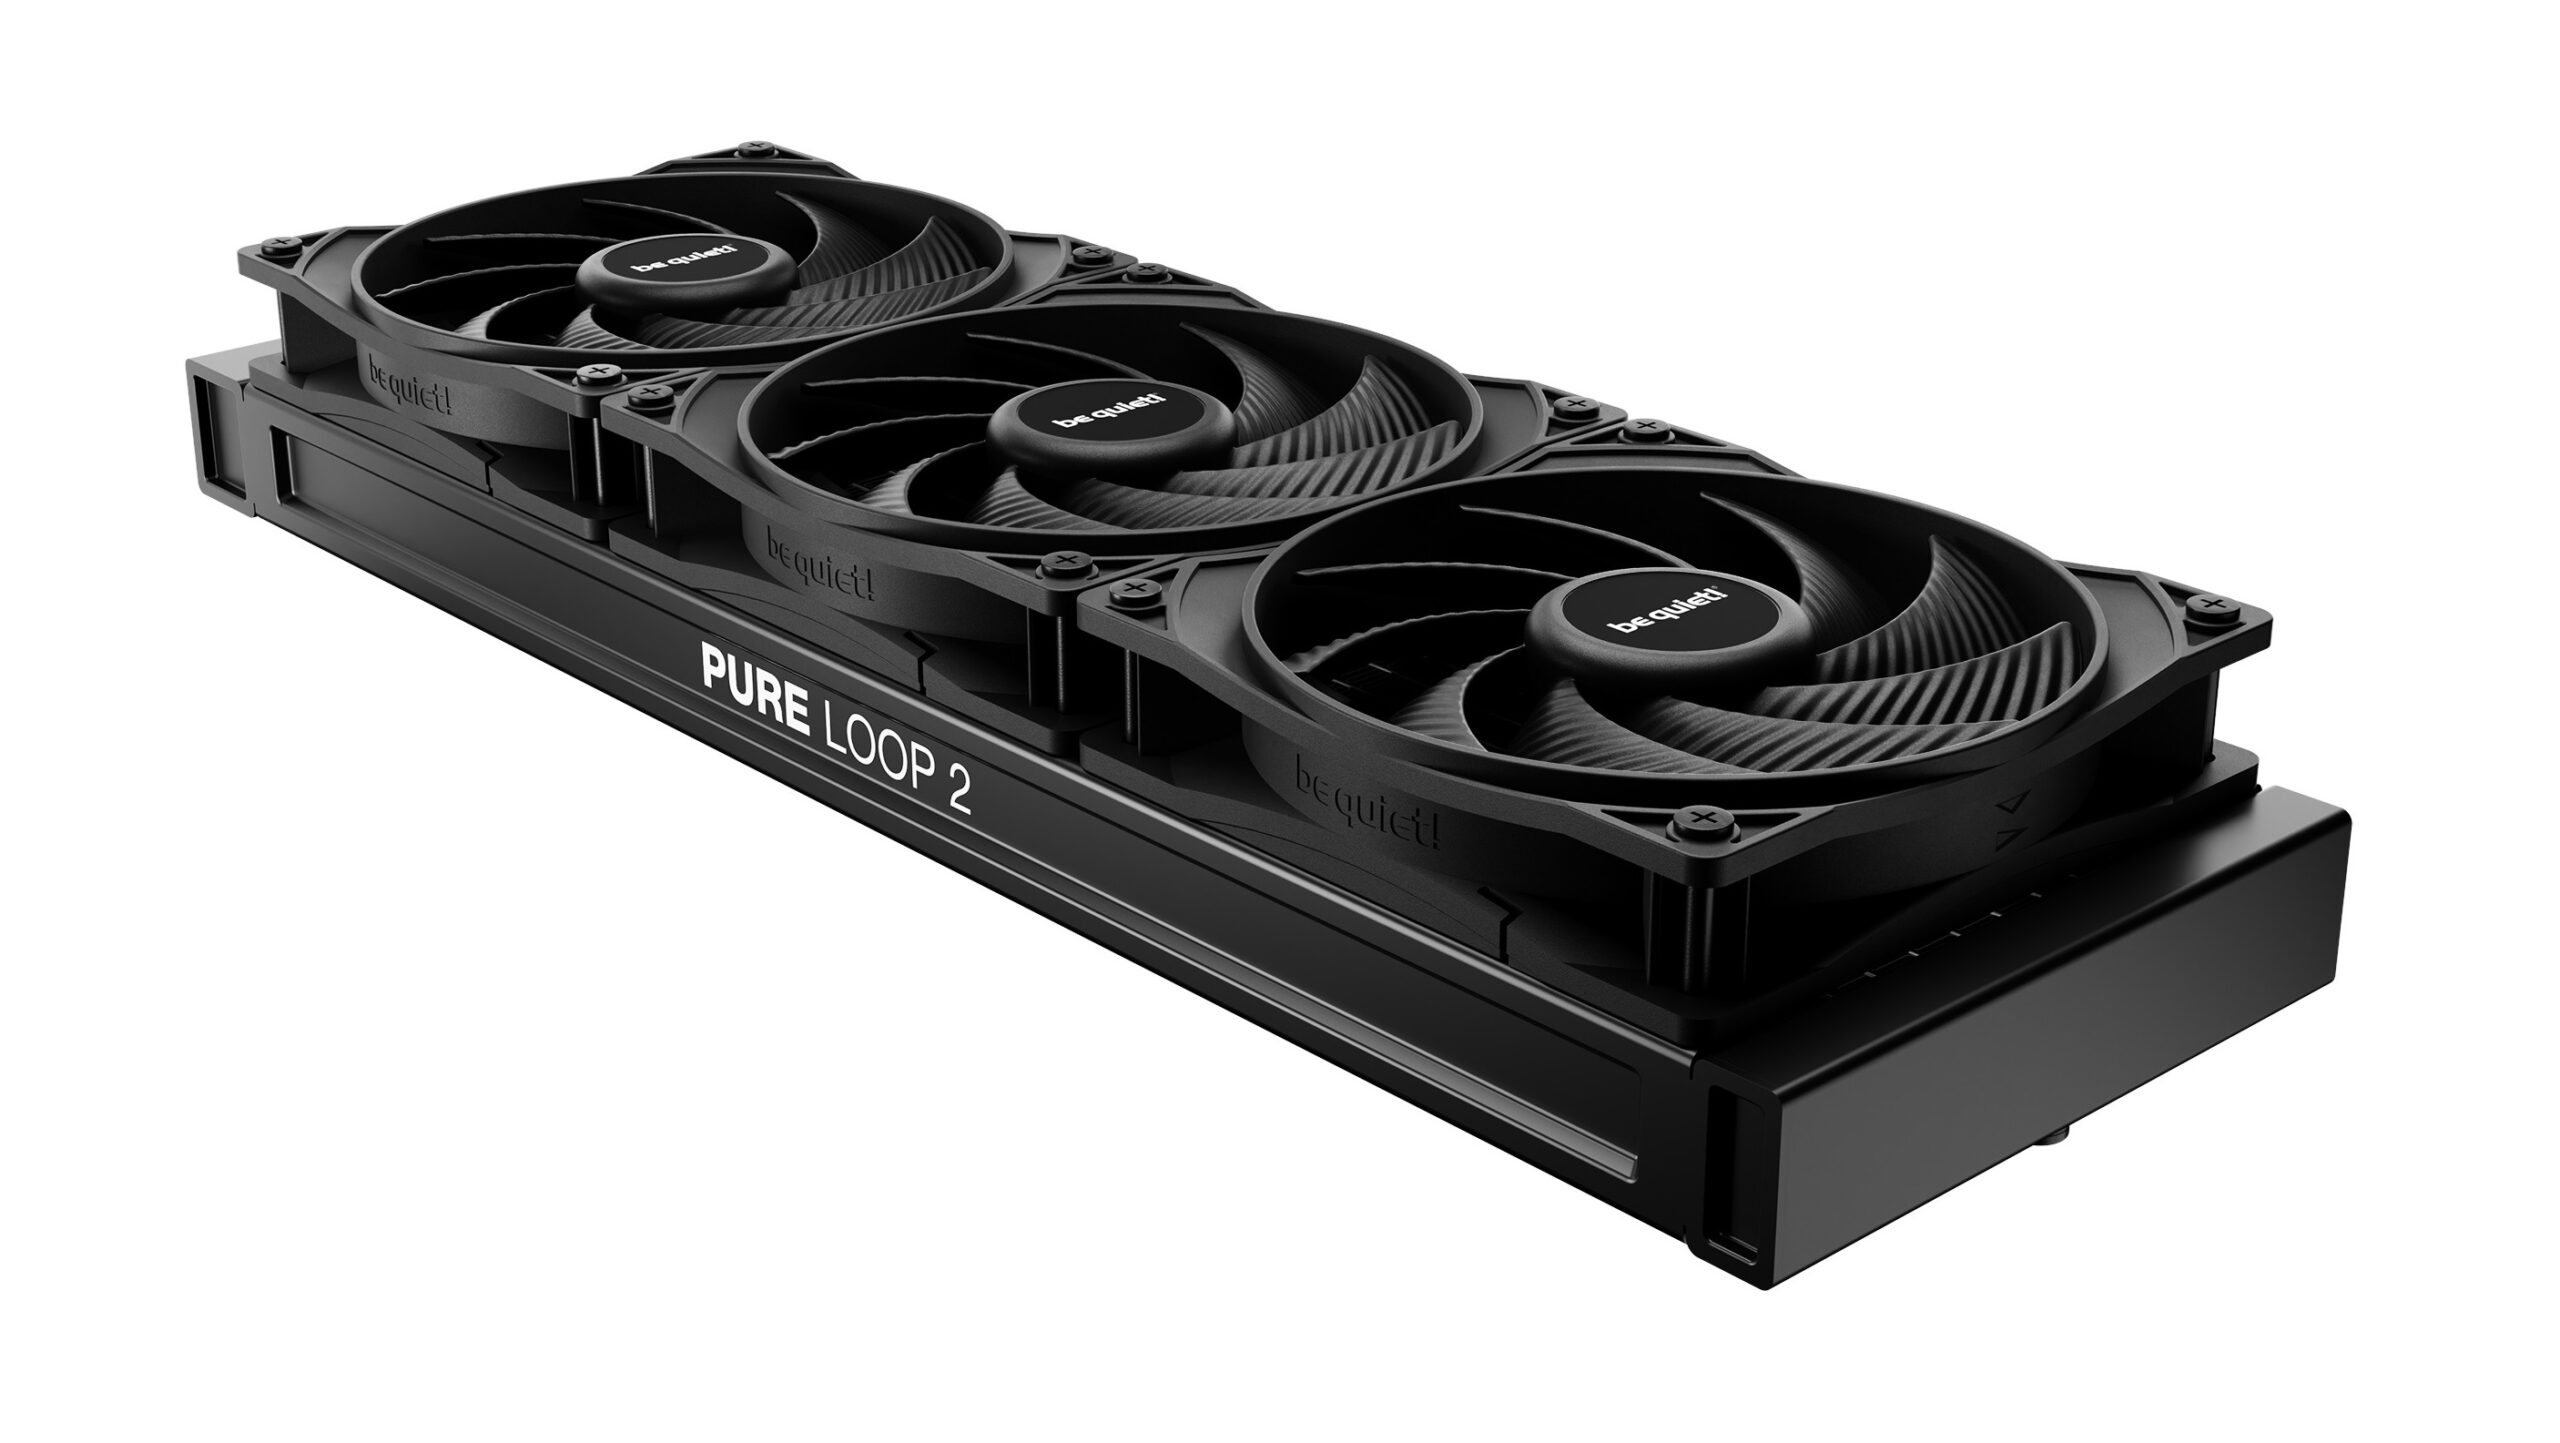 be quiet! launches their Pure Loop 2 series of silent CPU coolers